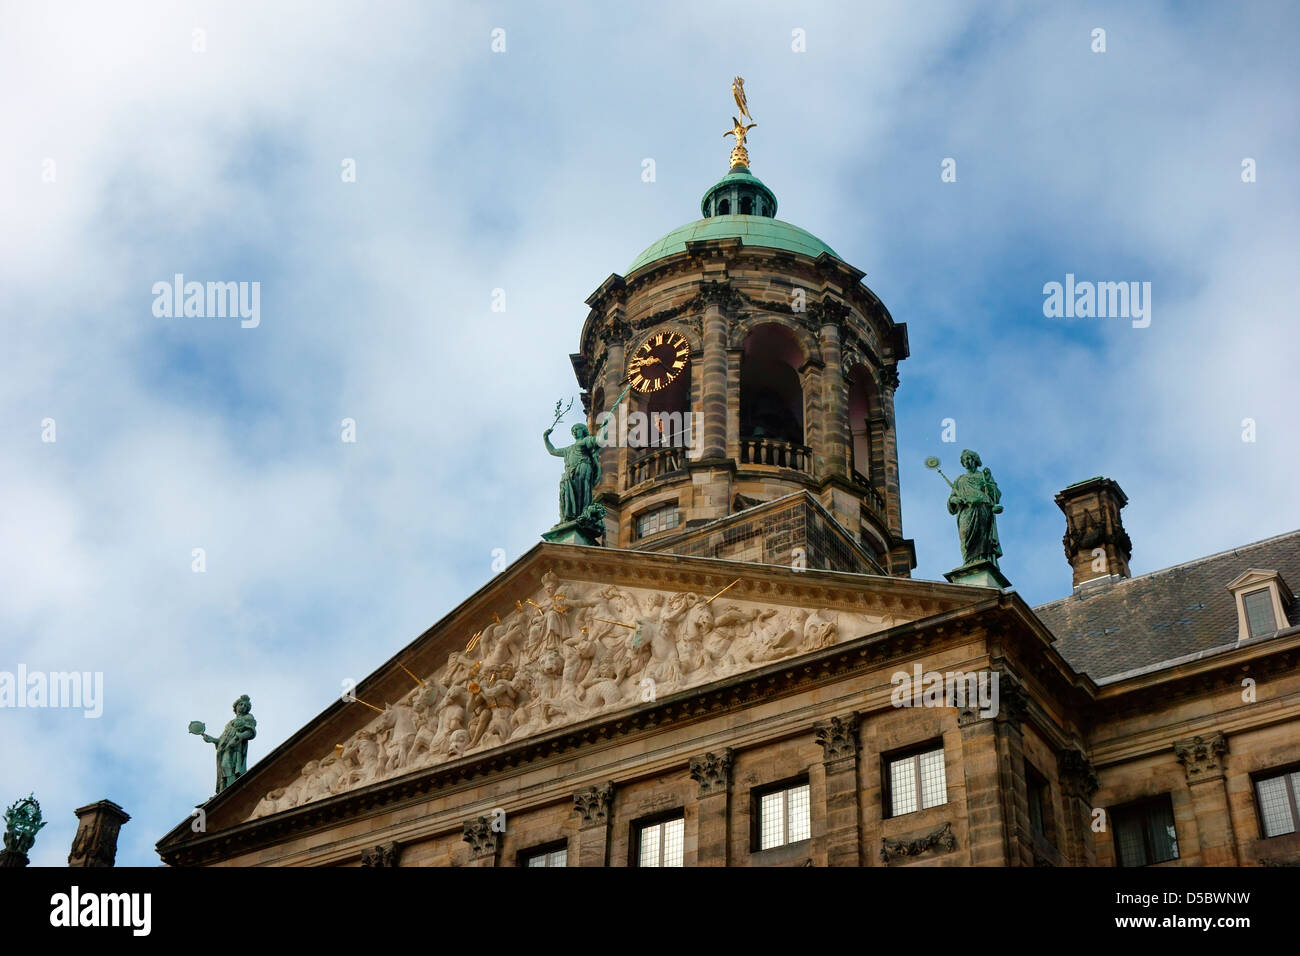 Royal Palace of the Dam Amsterdam domed roof Stock Photo